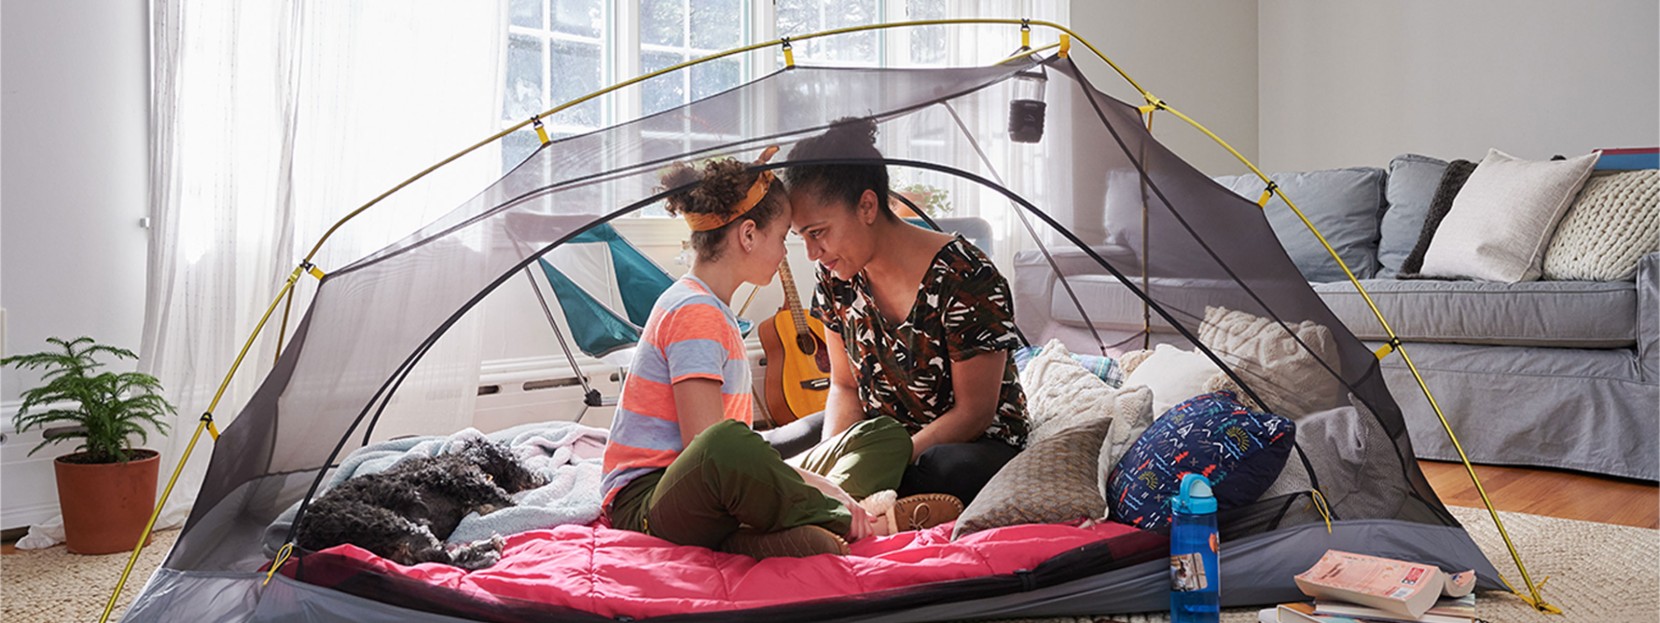 Mom and child sitting in a tent in their living room, indoor camping.